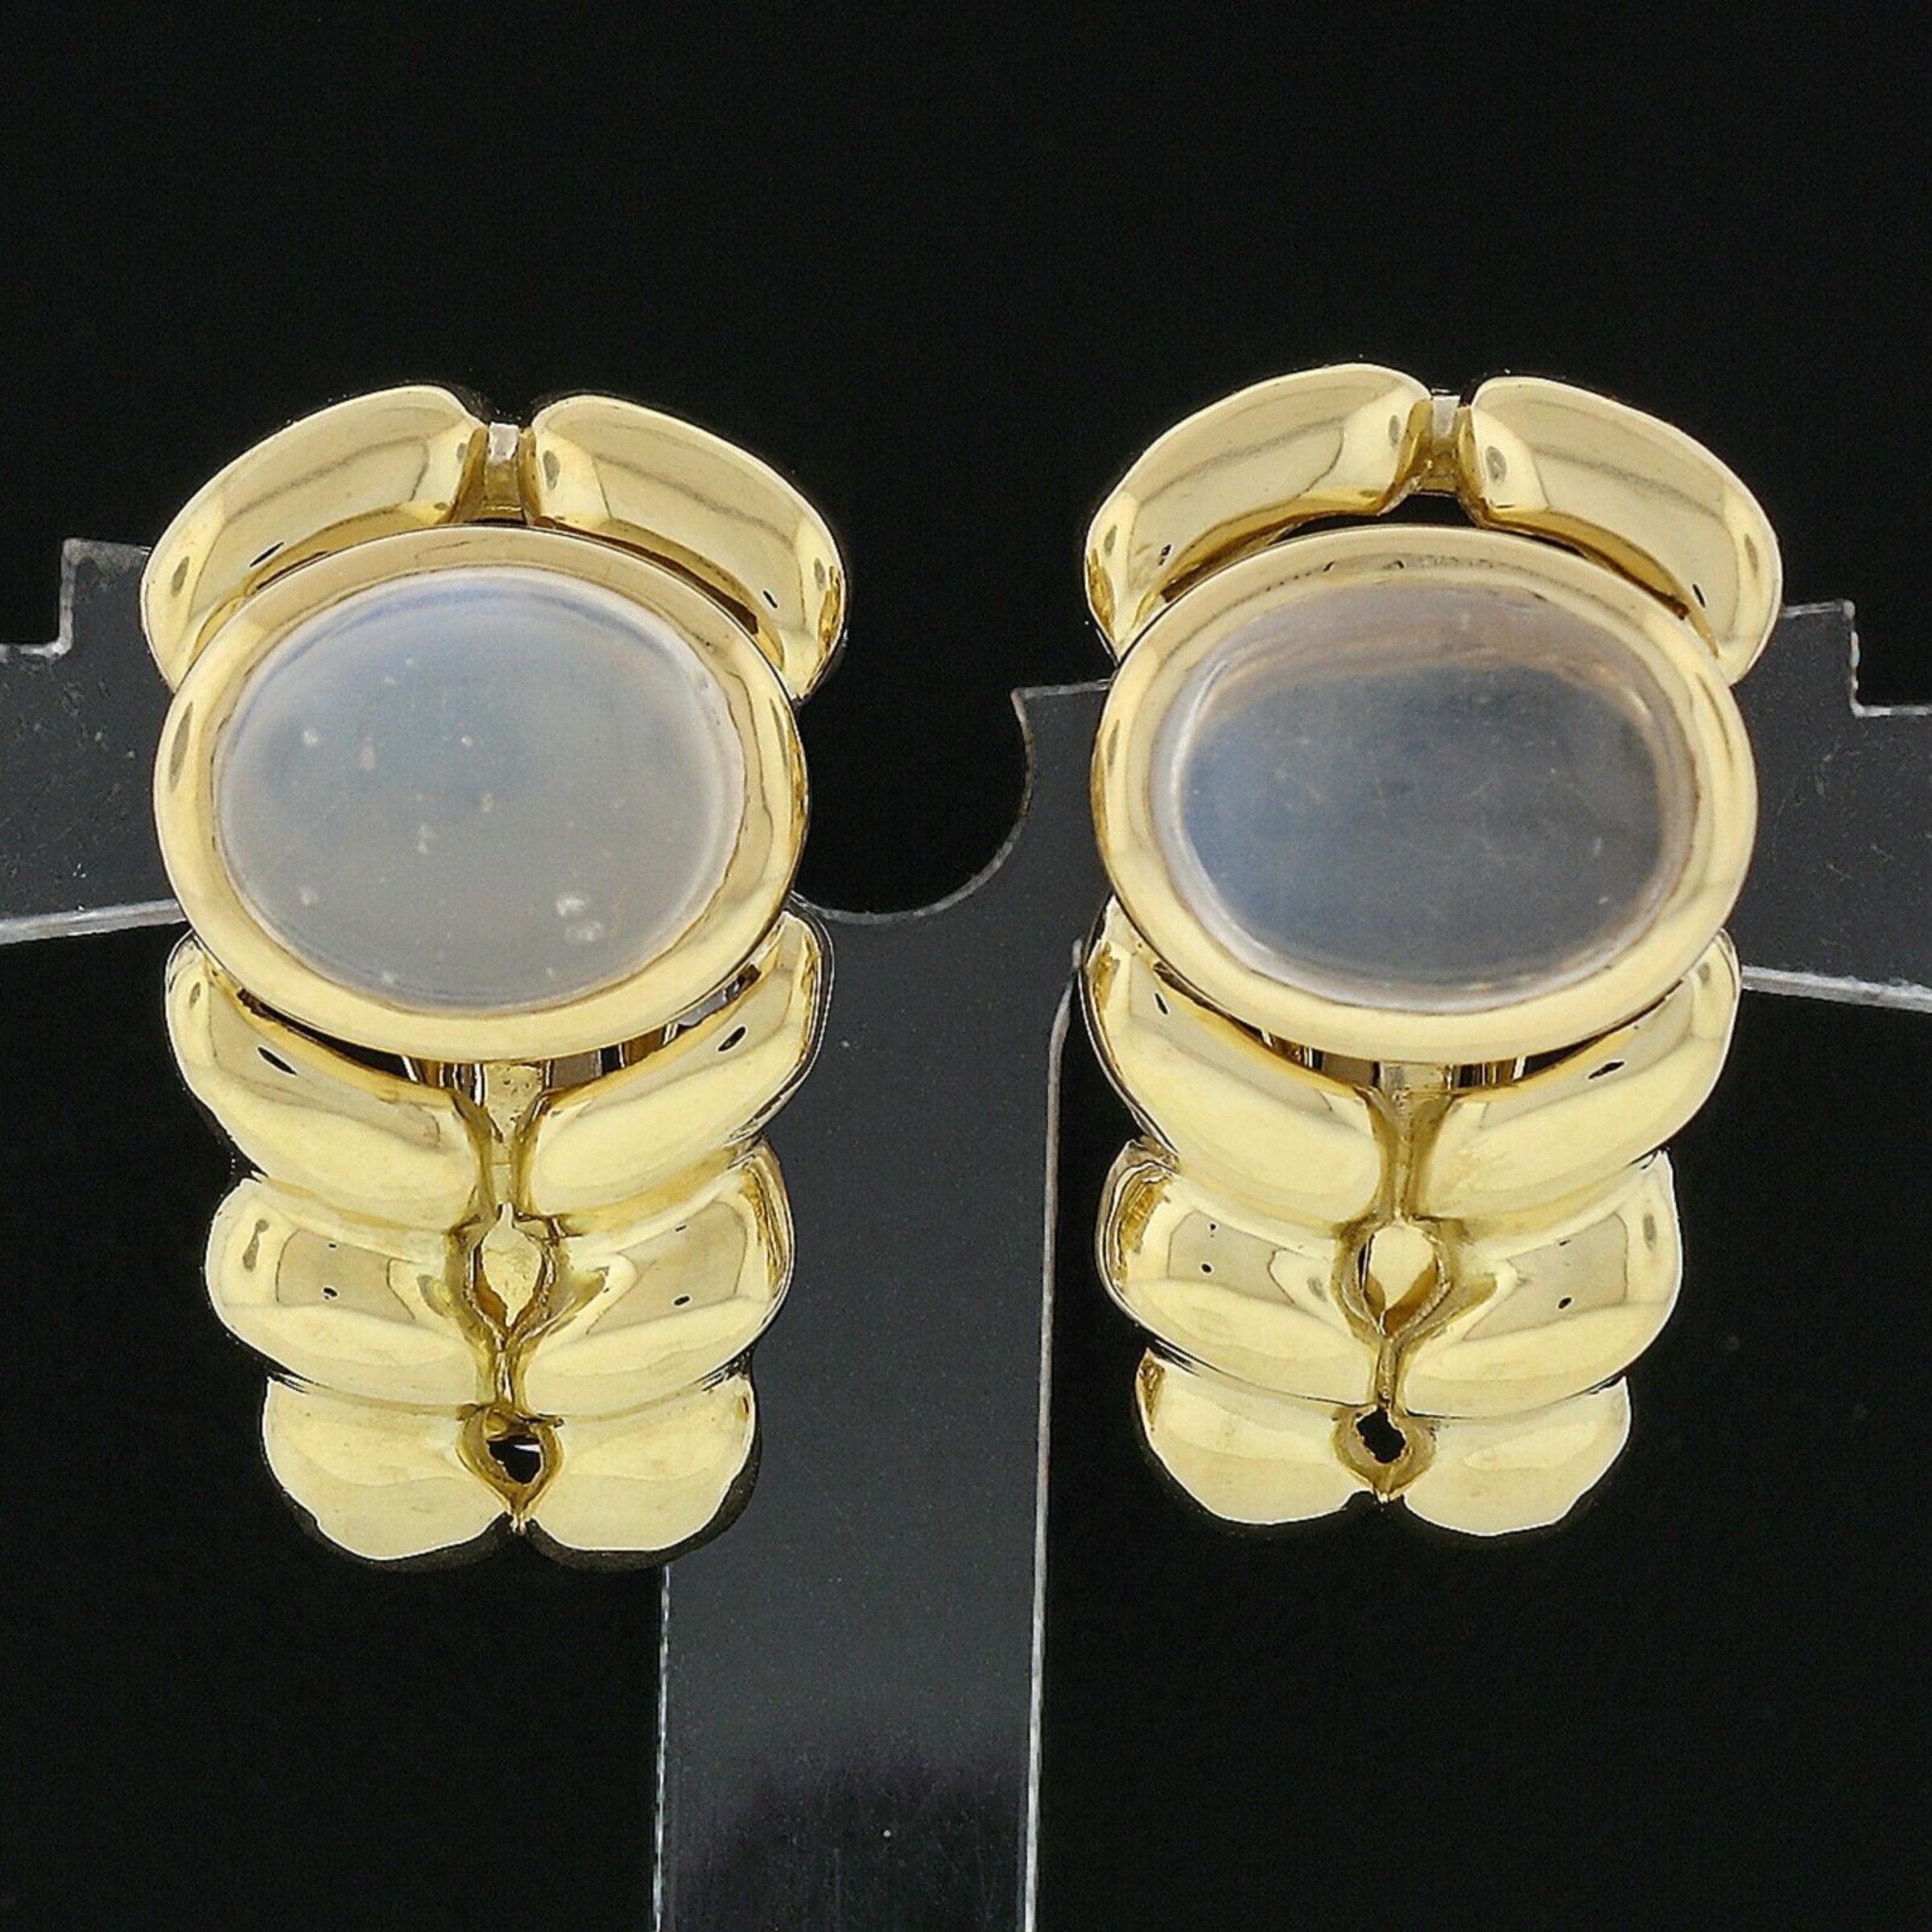 These beautiful vintage cuff earrings are very well crafted in solid 18k yellow gold. They feature a wide braided look design with a fine quality, oval cabochon cut moonstone that is bezel set near the top of the earring. These gorgeous stones are